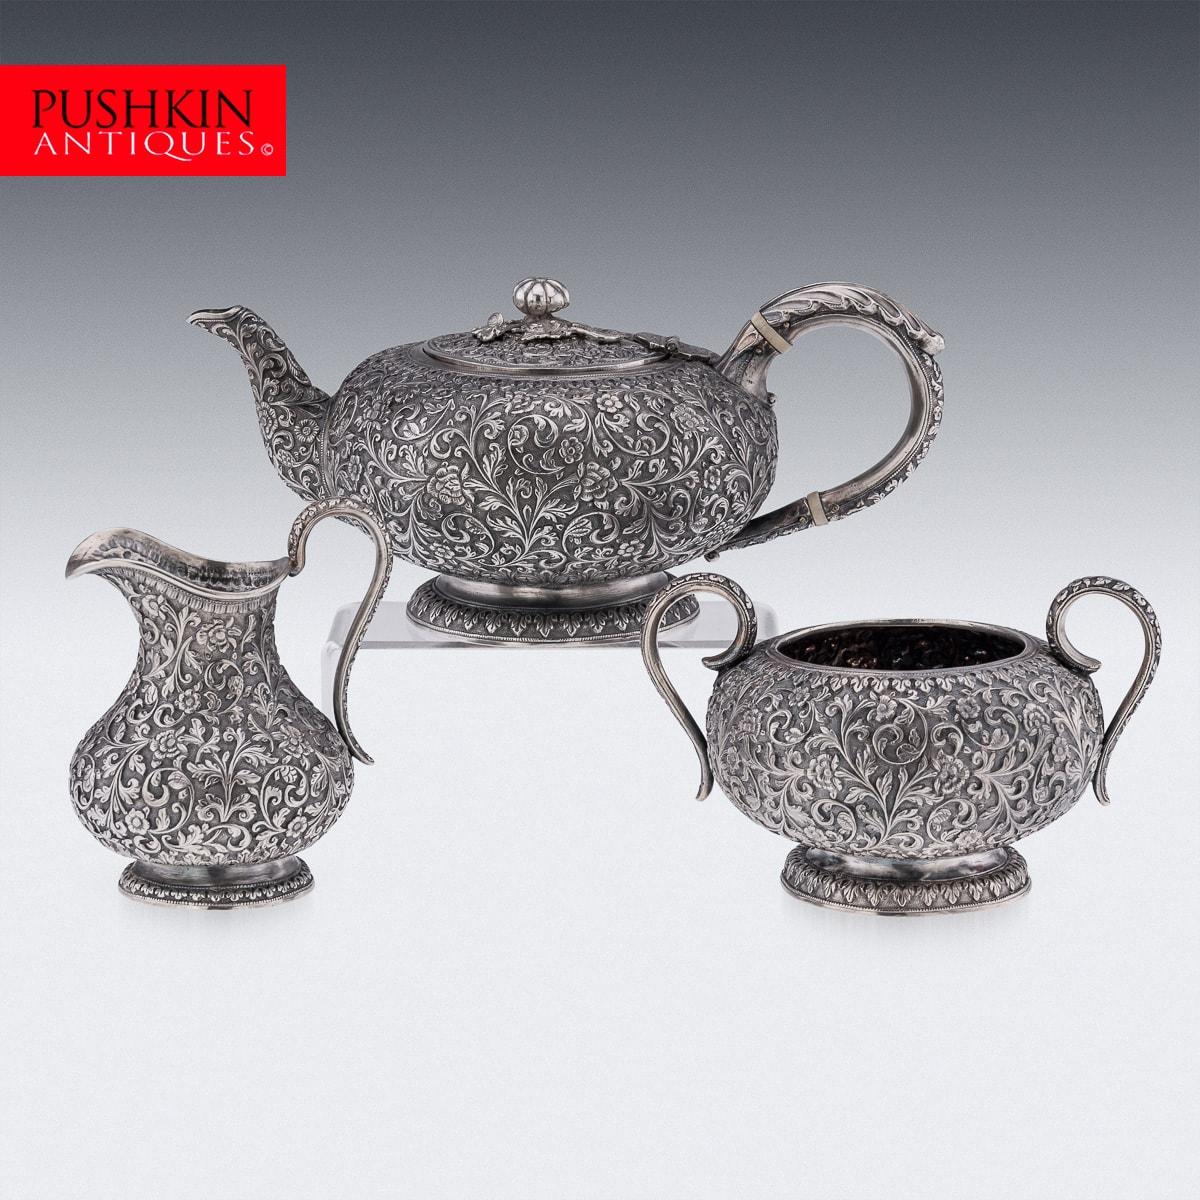 Antique late-19th Century Indian (Kutch) solid silver three-piece tea set, comprising of a teapot, sugar bowl, cream jug and tray, each piece is profusely and beautifully repousse' decorated with scrolling foliage and flowers on a tooled ground,